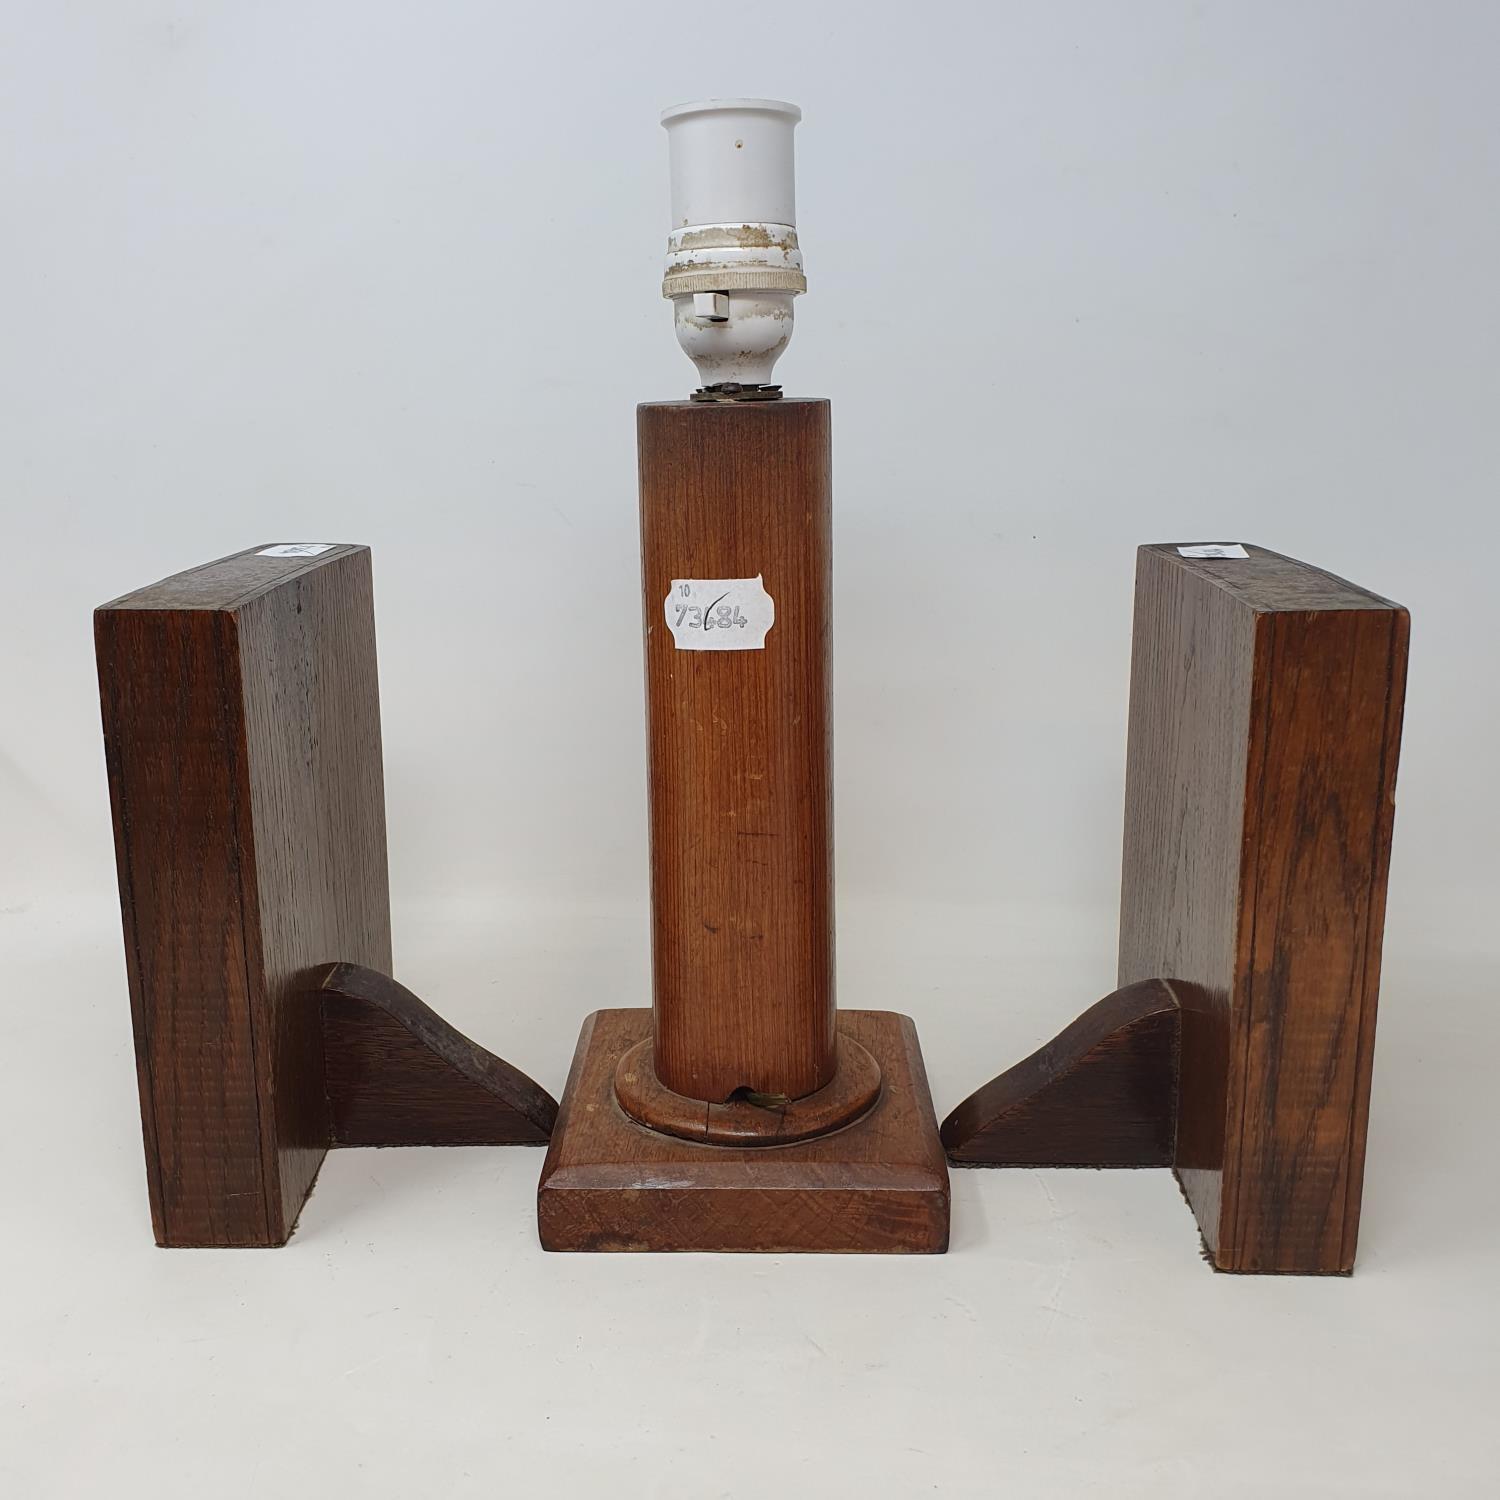 An early 20th century oak lamp base, painted with a crest, 24 cm, and a pair of similar bookends, in - Image 2 of 3